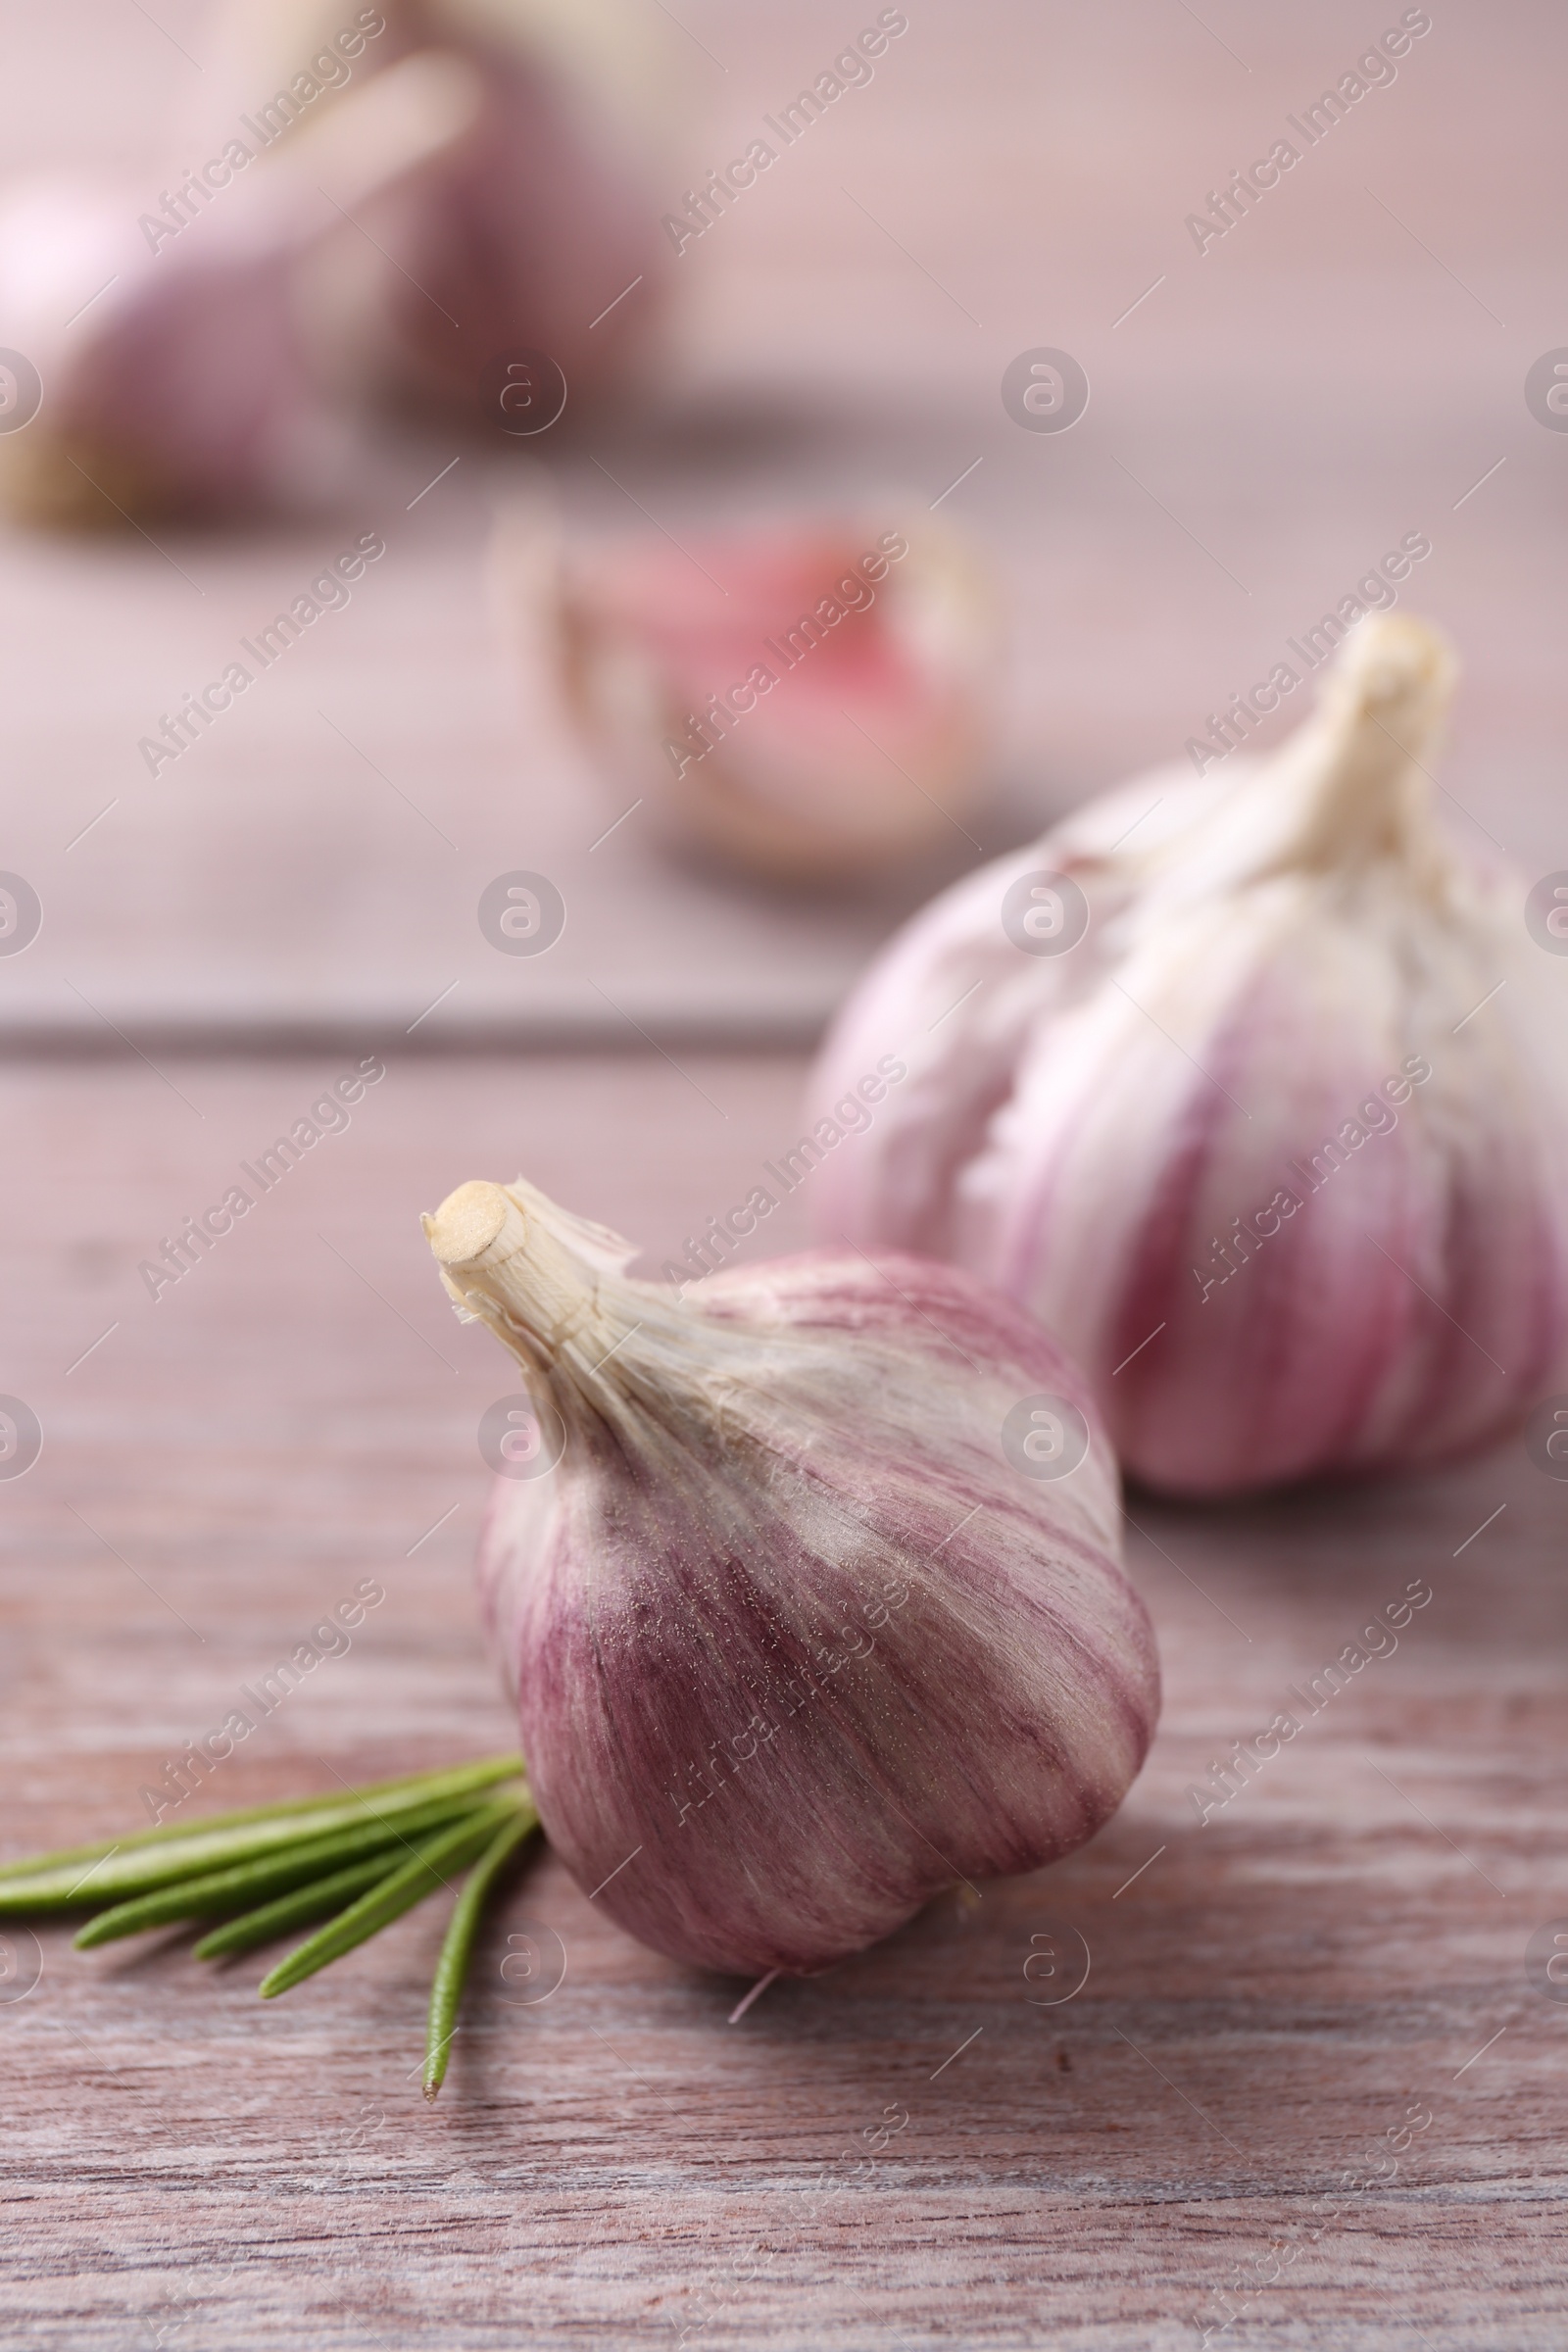 Photo of Bulbs of fresh garlic on wooden table, selective focus